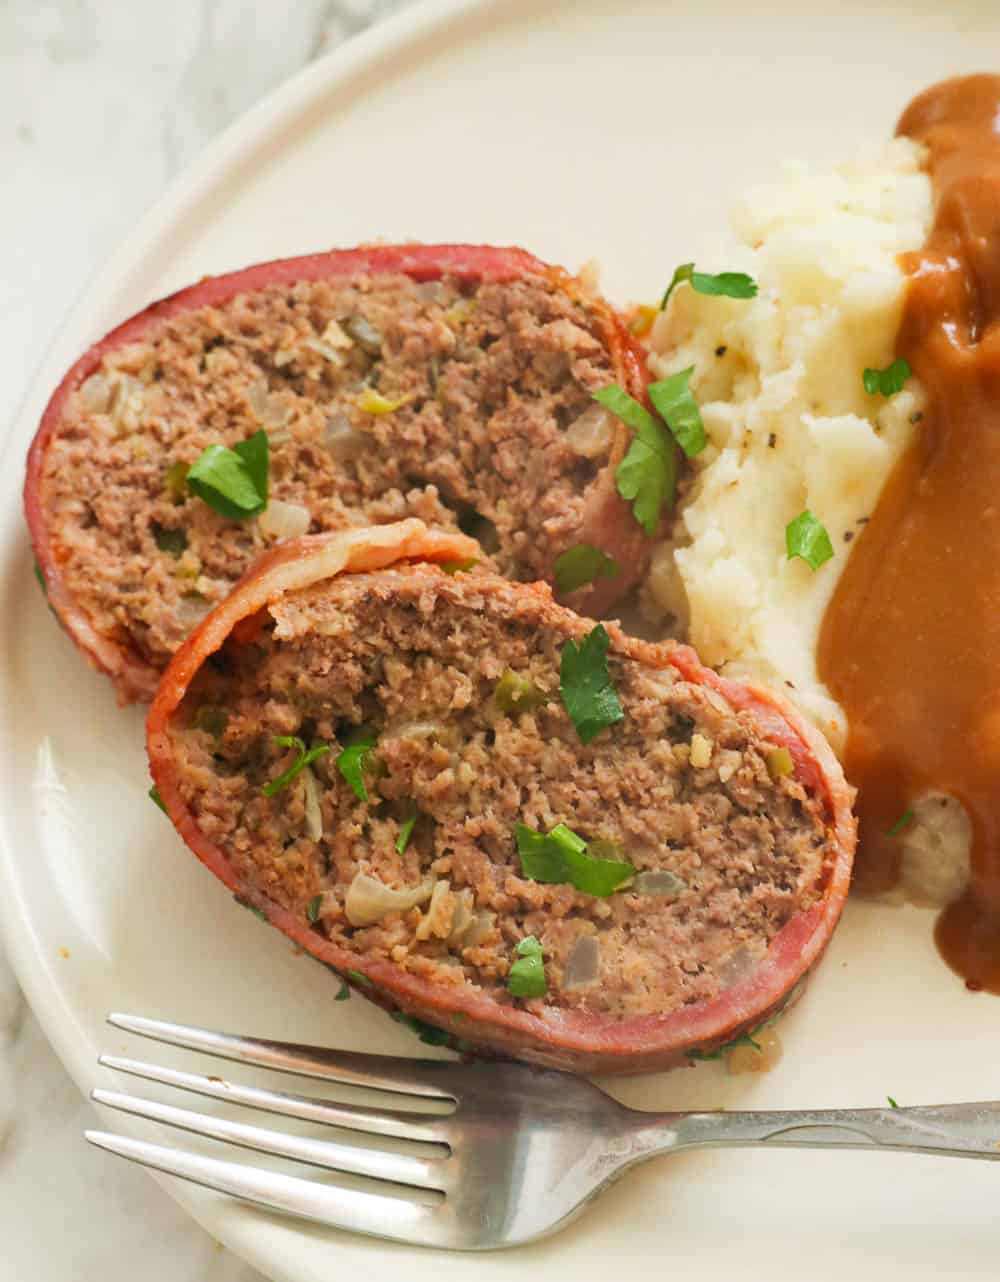 Sliced meatloaf with mashed potatoes, gravy, and parsley garnish